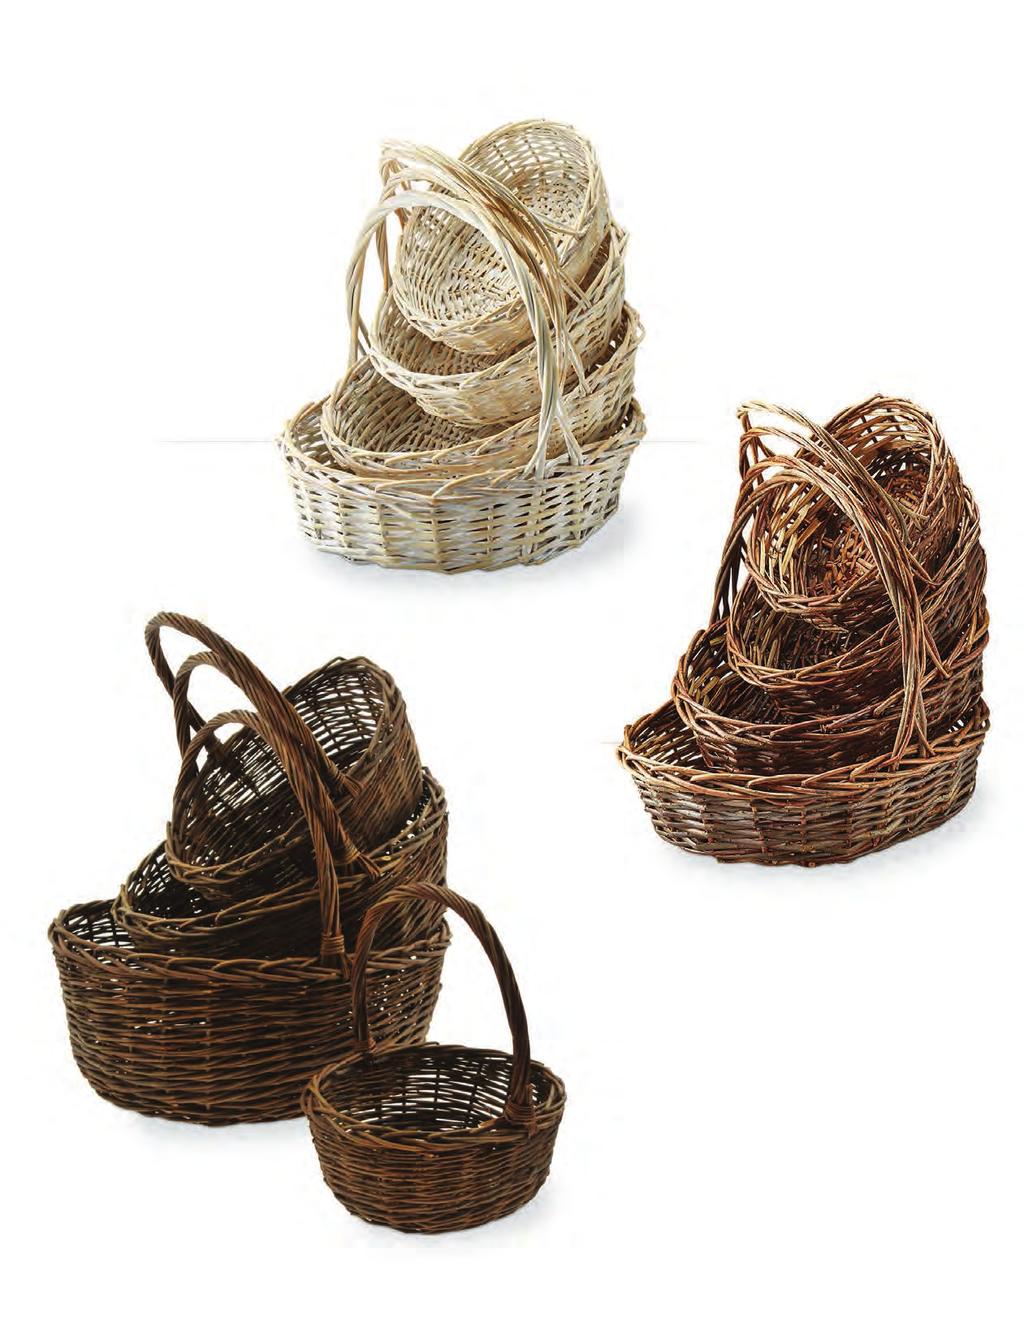 Set/4 Oval Willow Baskets Large: 18.5 x 15.5 x 5 Small: 12 x 9.25 x 3.5 Includes Hard Plastic Liners Also available in Dark Brown Stain 5175-ST 4/$21.99 set 5150-WW 4/$21.